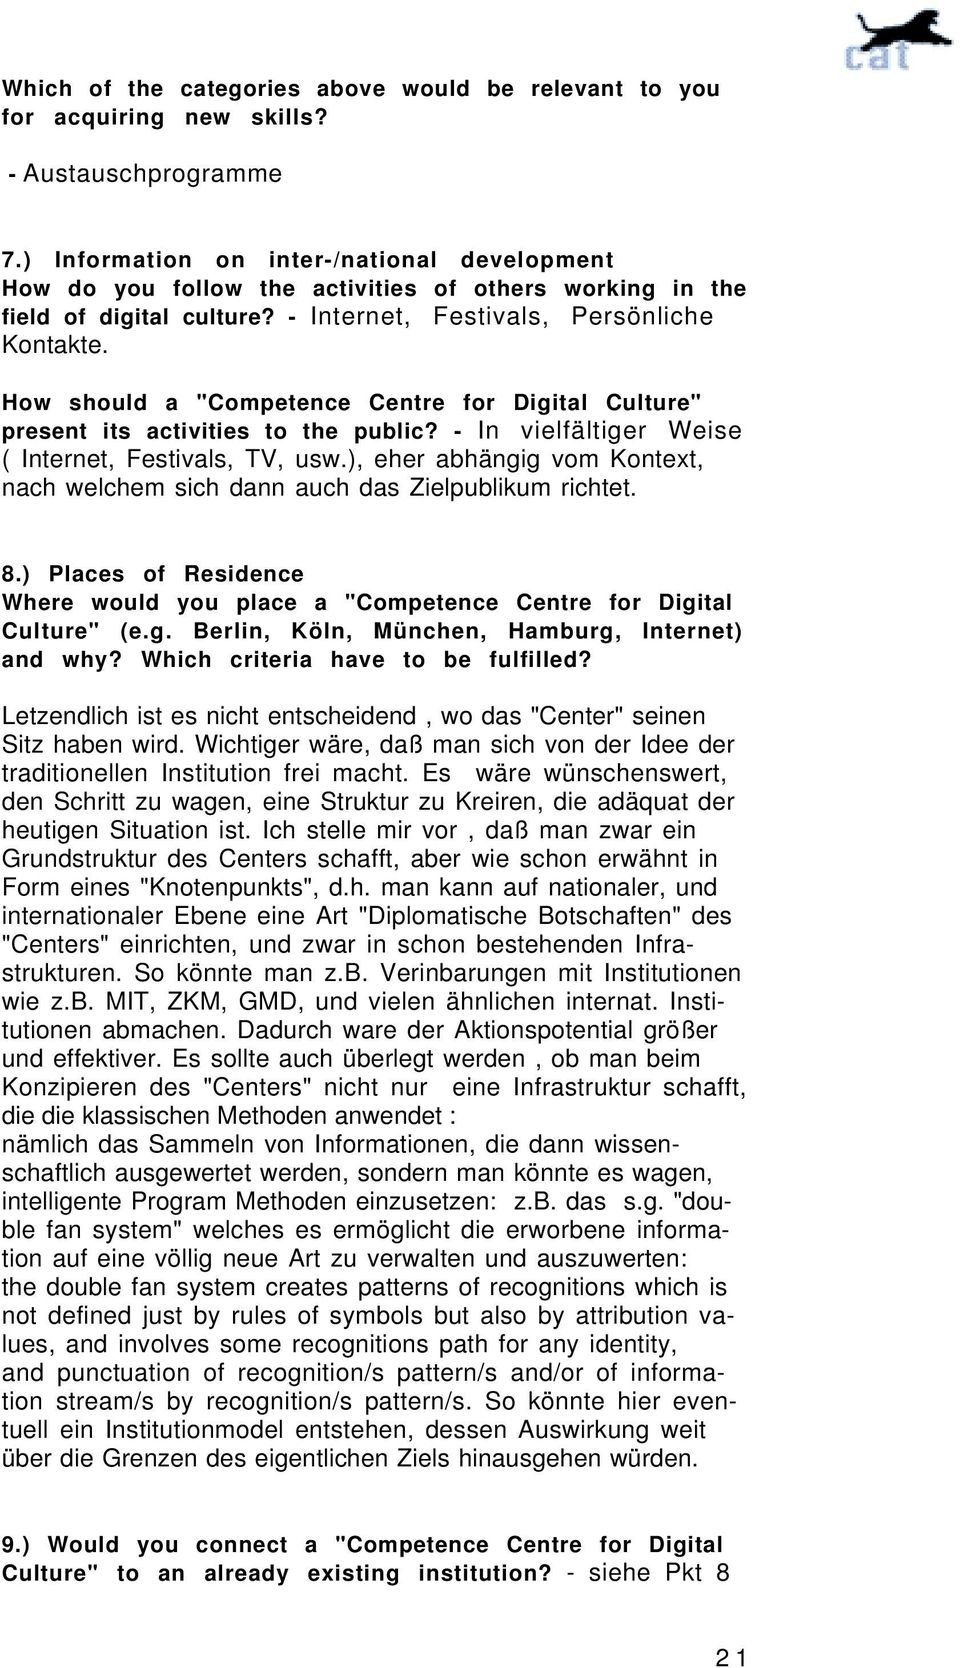 How should a "Competence Centre for Digital Culture" present its activities to the public? - In vielfältiger Weise ( Internet, Festivals, TV, usw.